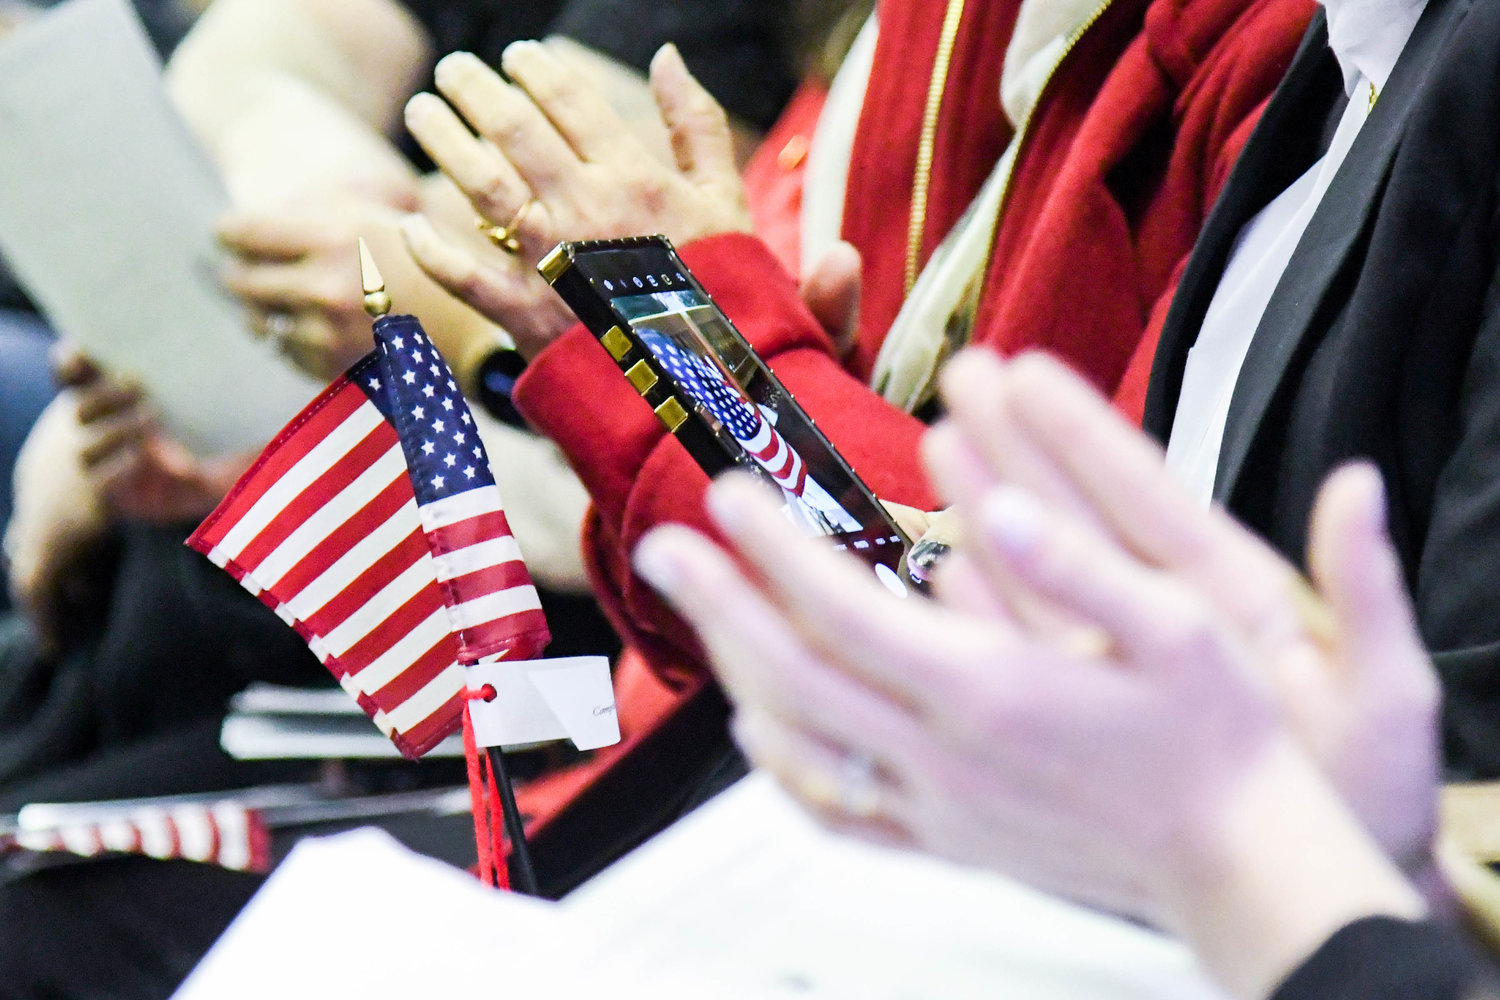 TO BE AN AMERICAN — Forty-eight residents representing 24 nations from around the world were sworn in as new American citizens during a naturalization ceremony on Thursday at the Utica Federal Courthouse on Broad Street.